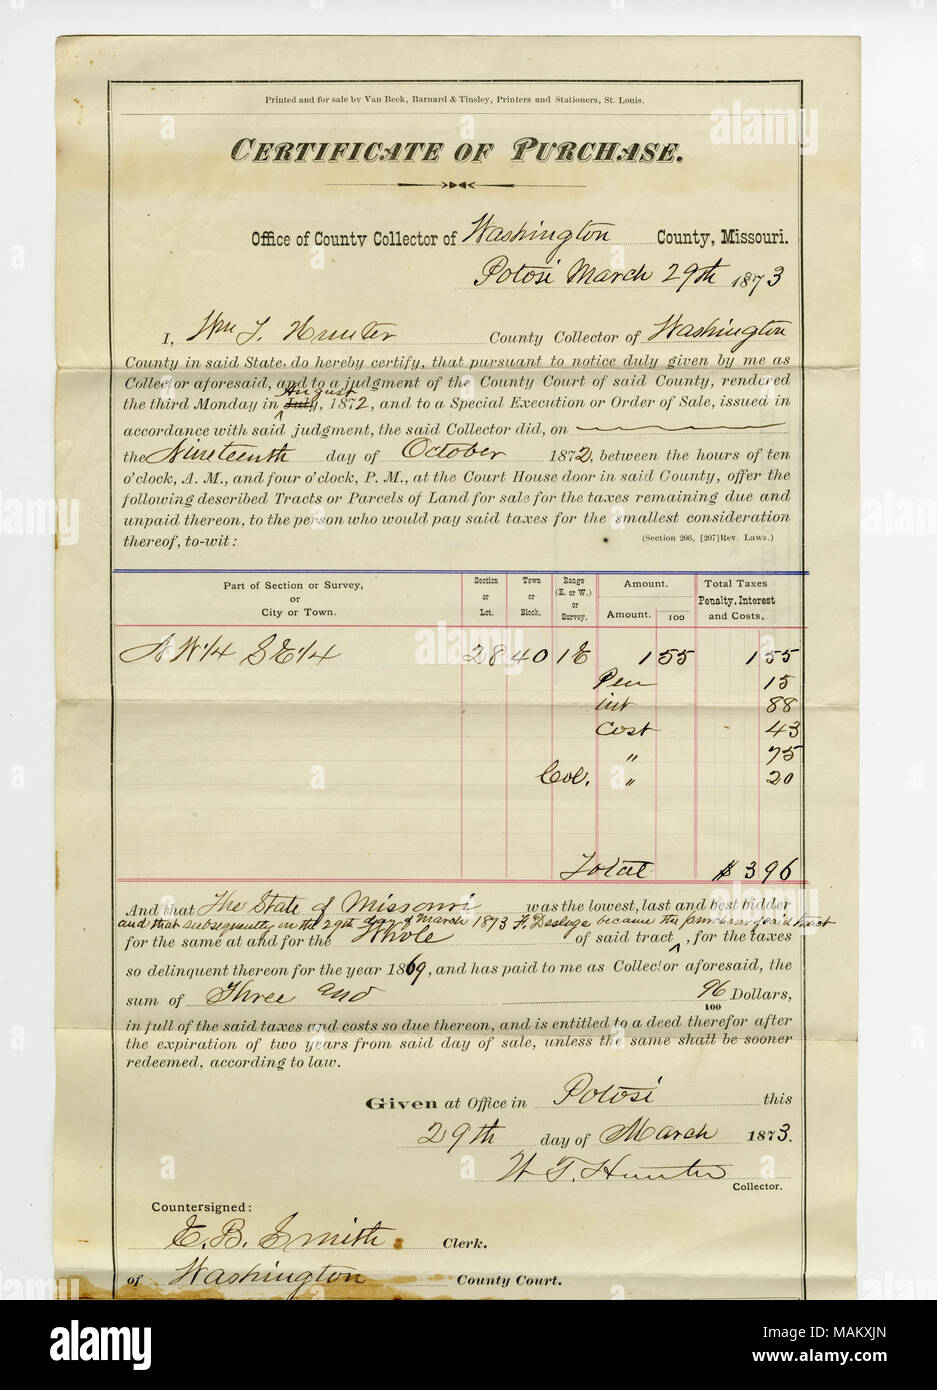 Purchase of property from county for past due taxes by F. Desloge in the amount of $3.96 at Potosi, 1 parcel described as NW 1/4 SE 1/4 Section or Lot 28, Town or Block 40, Range or Survey 1E in Washington County. Title: Certificate of purchase signed W.T. Hunter, Collector of Washington County, March 29, 1873  . 29 March 1873. Hunter, W.T. Stock Photo